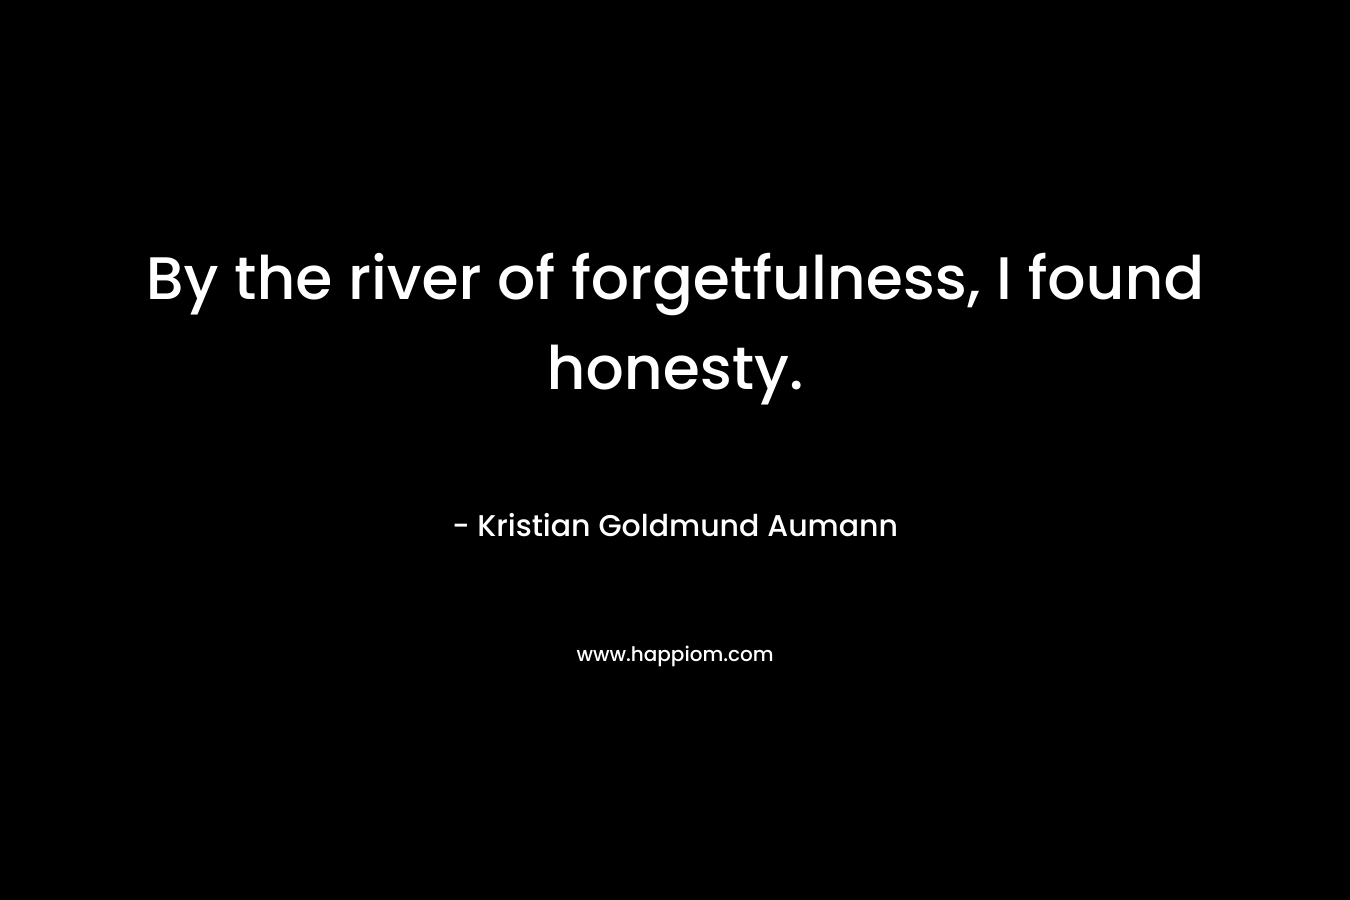 By the river of forgetfulness, I found honesty.